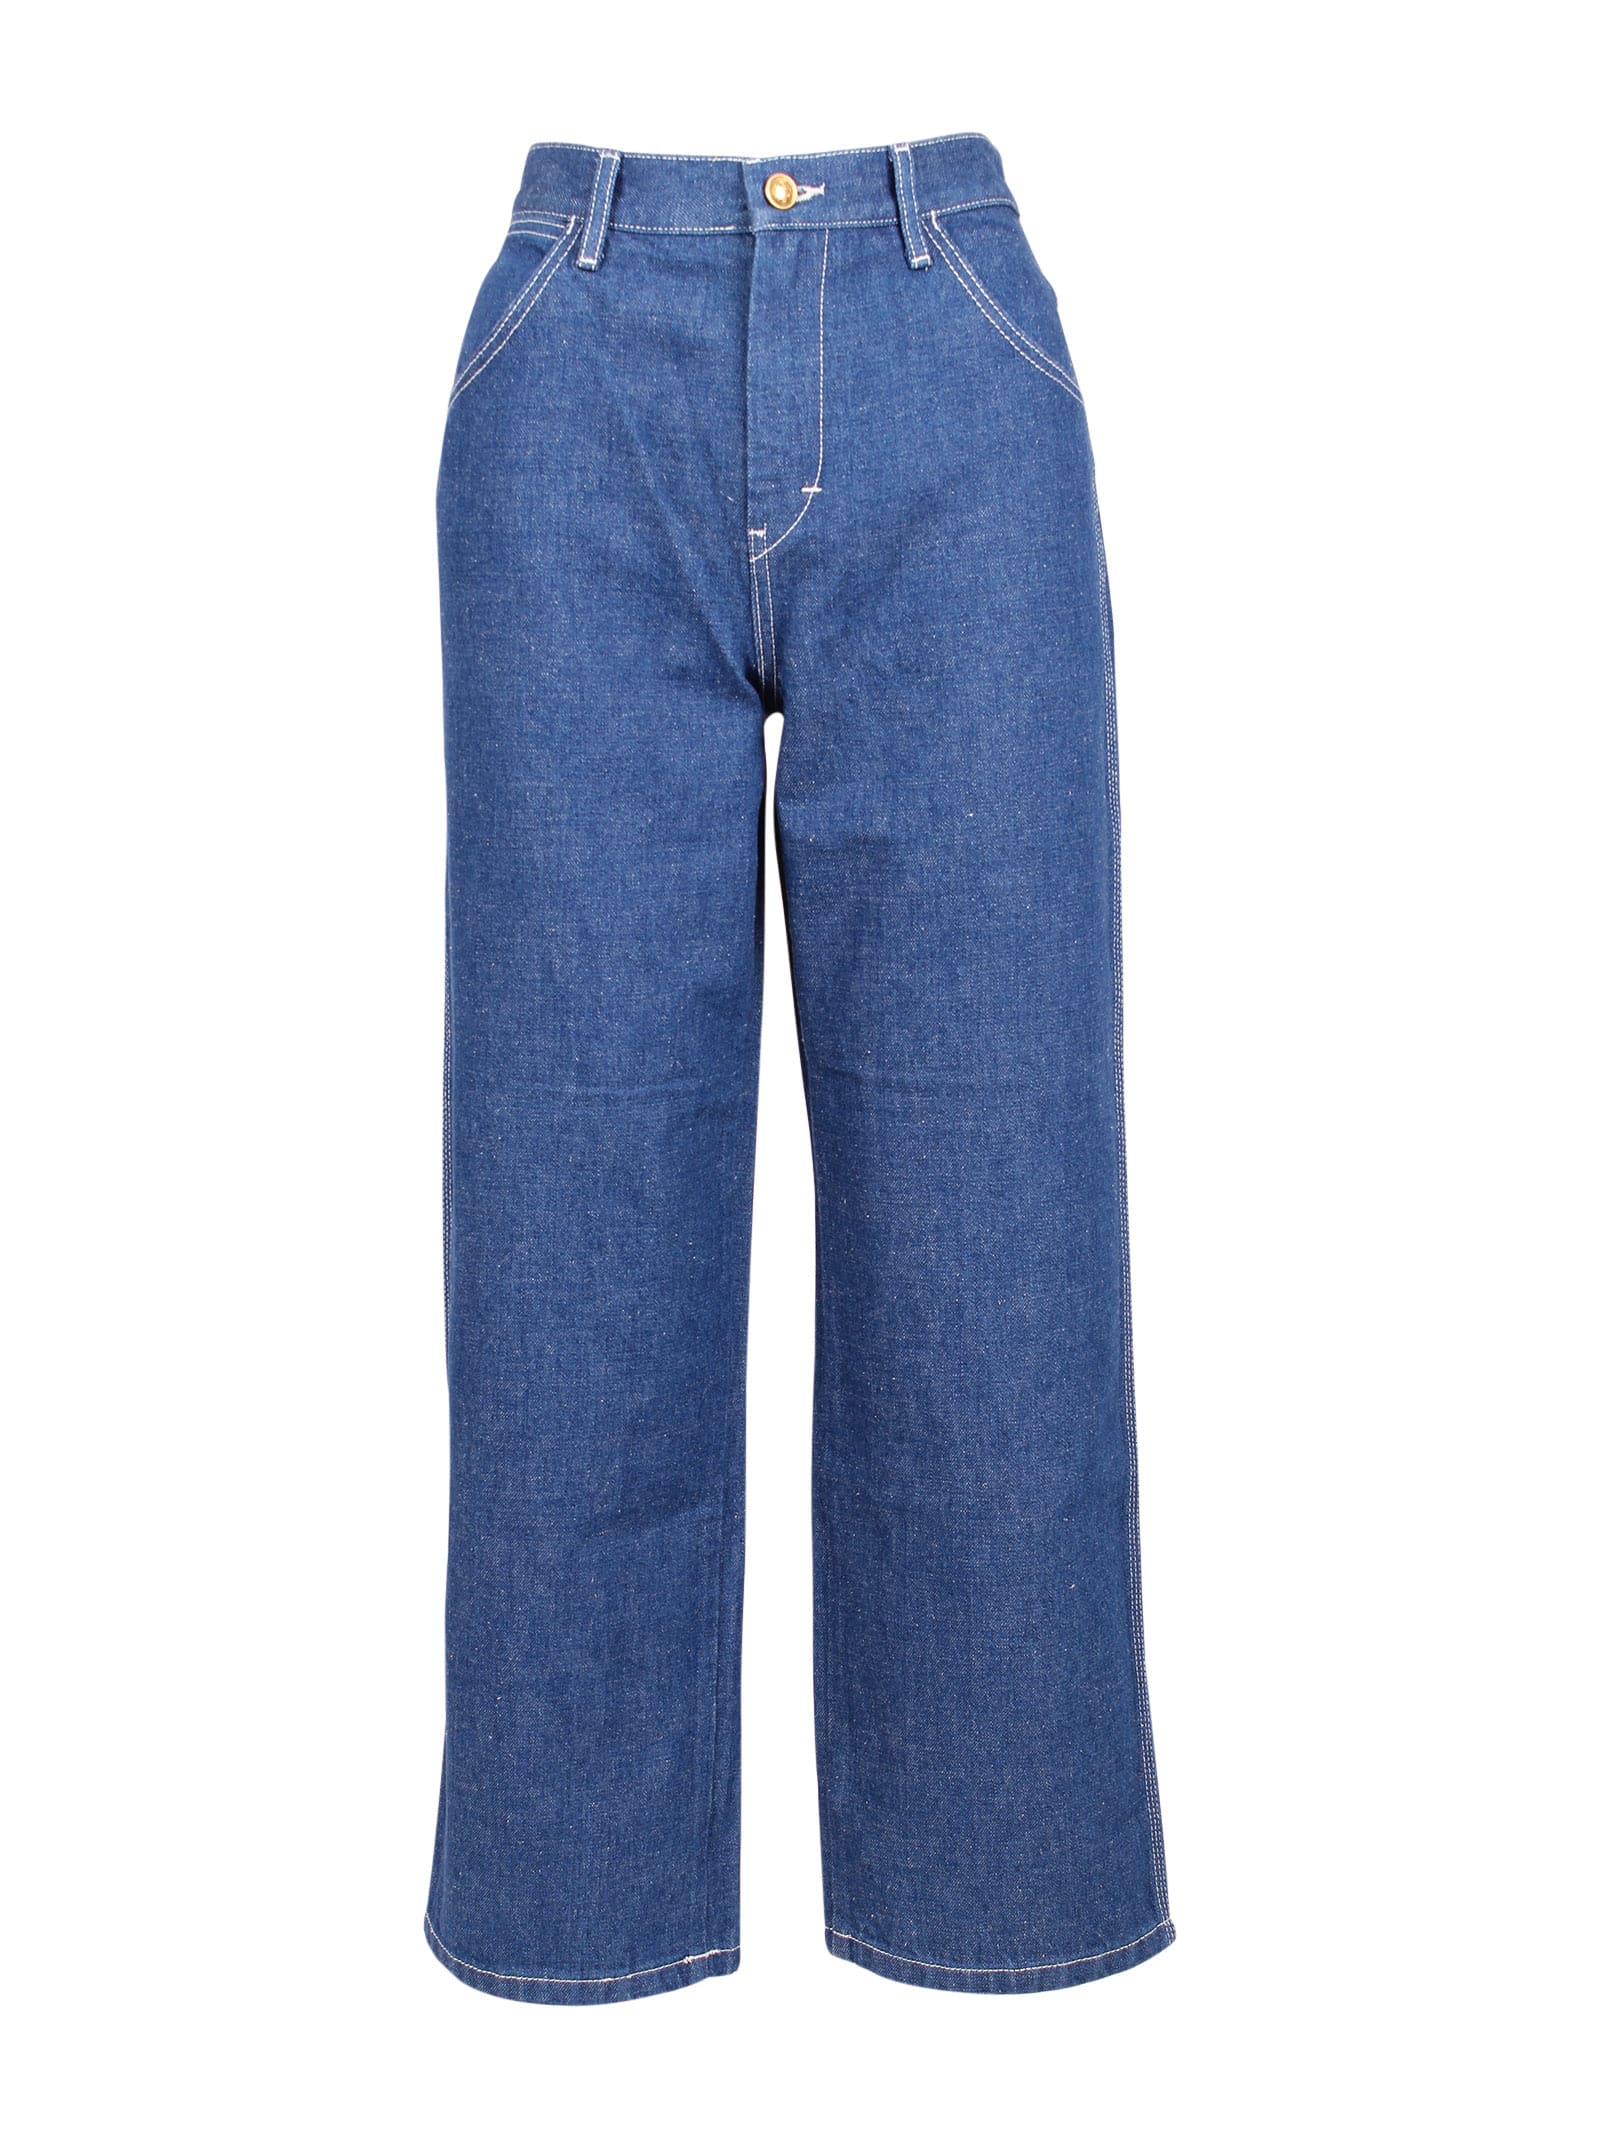 Tory Burch Cotton Jeans